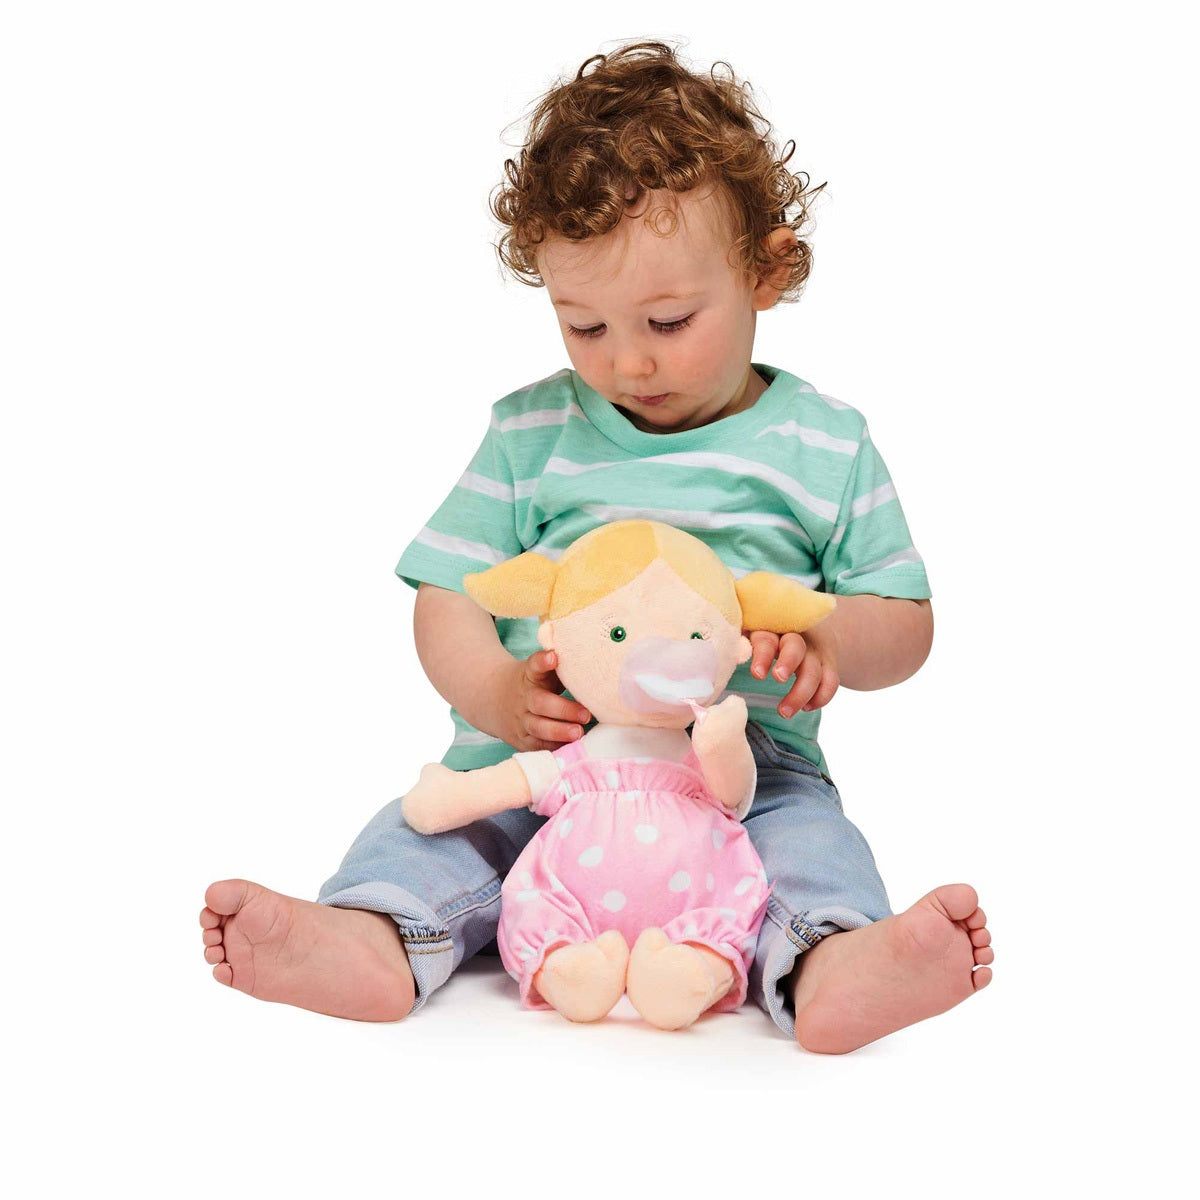 Cupcake Cuddle and Care Dolly Gracie Baby Doll